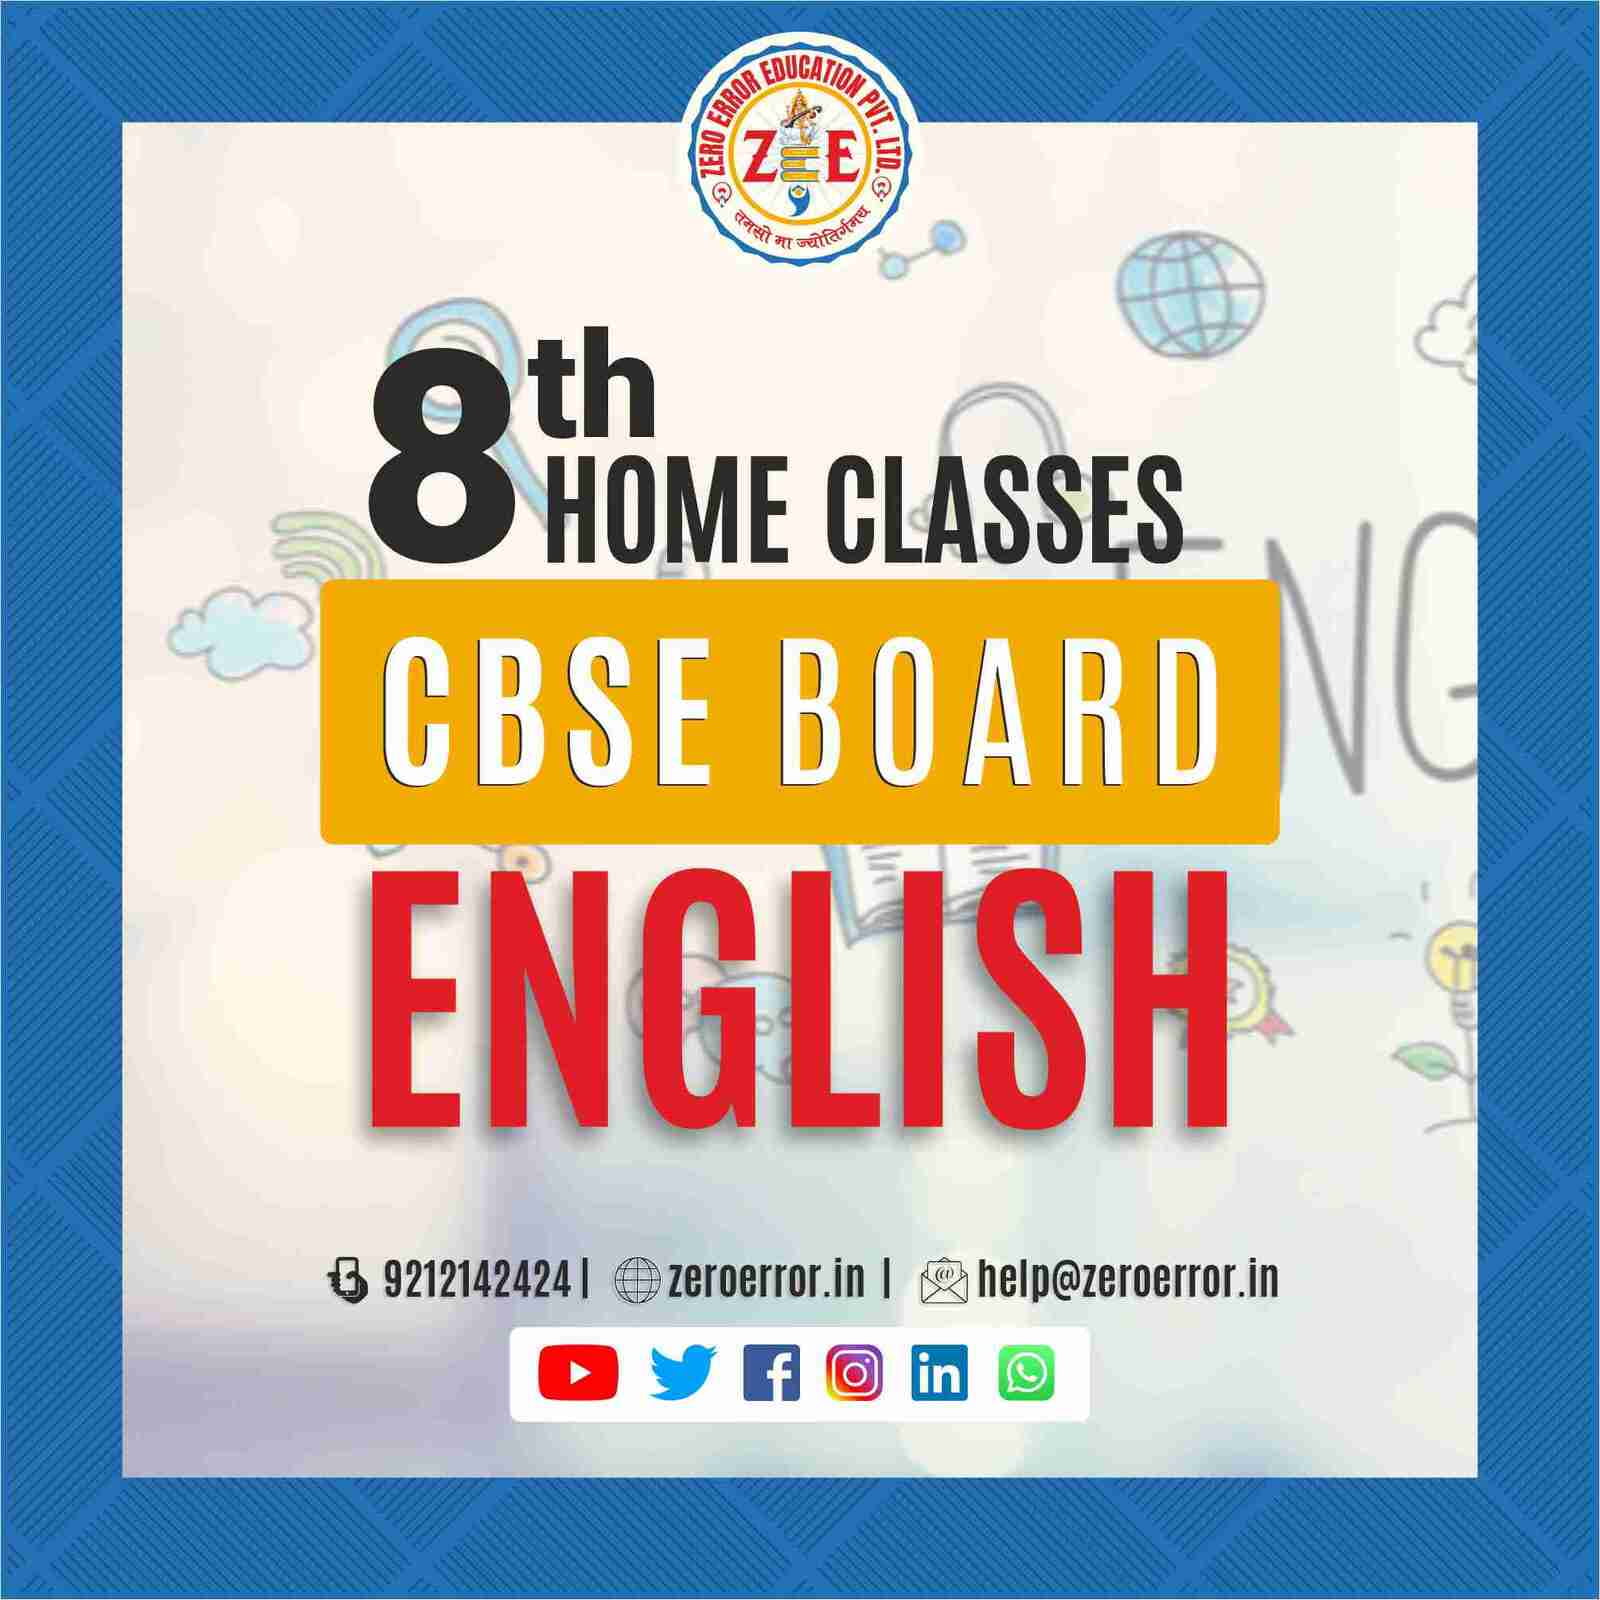 8th Grade CBSE English Online Classes by Zero Error Education Prepare for your CBSE board exams with online and offline English classes for 8th grade. Learn from experienced home tutors and get all the help you need to succeed. Enroll today at Zero Error Education. [https://zeroerror.in/] Call 9212142424 for more information.